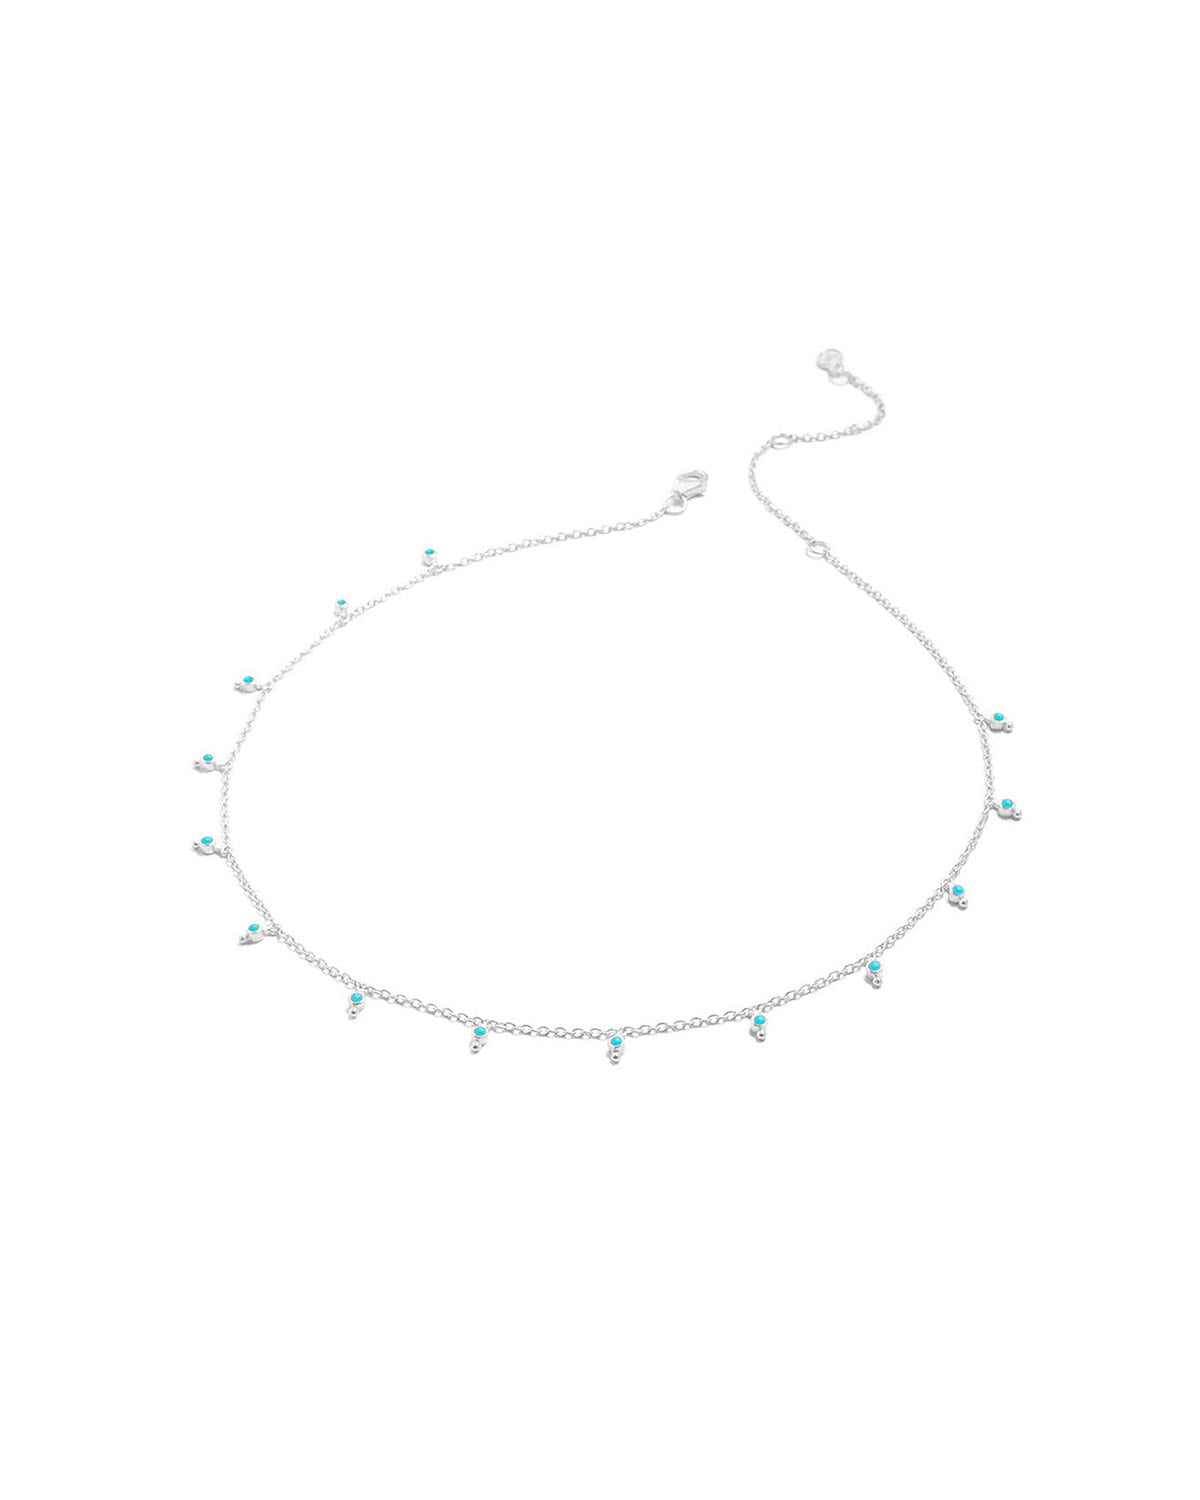 Super Paver Turquoise Silver Necklace - Moon London